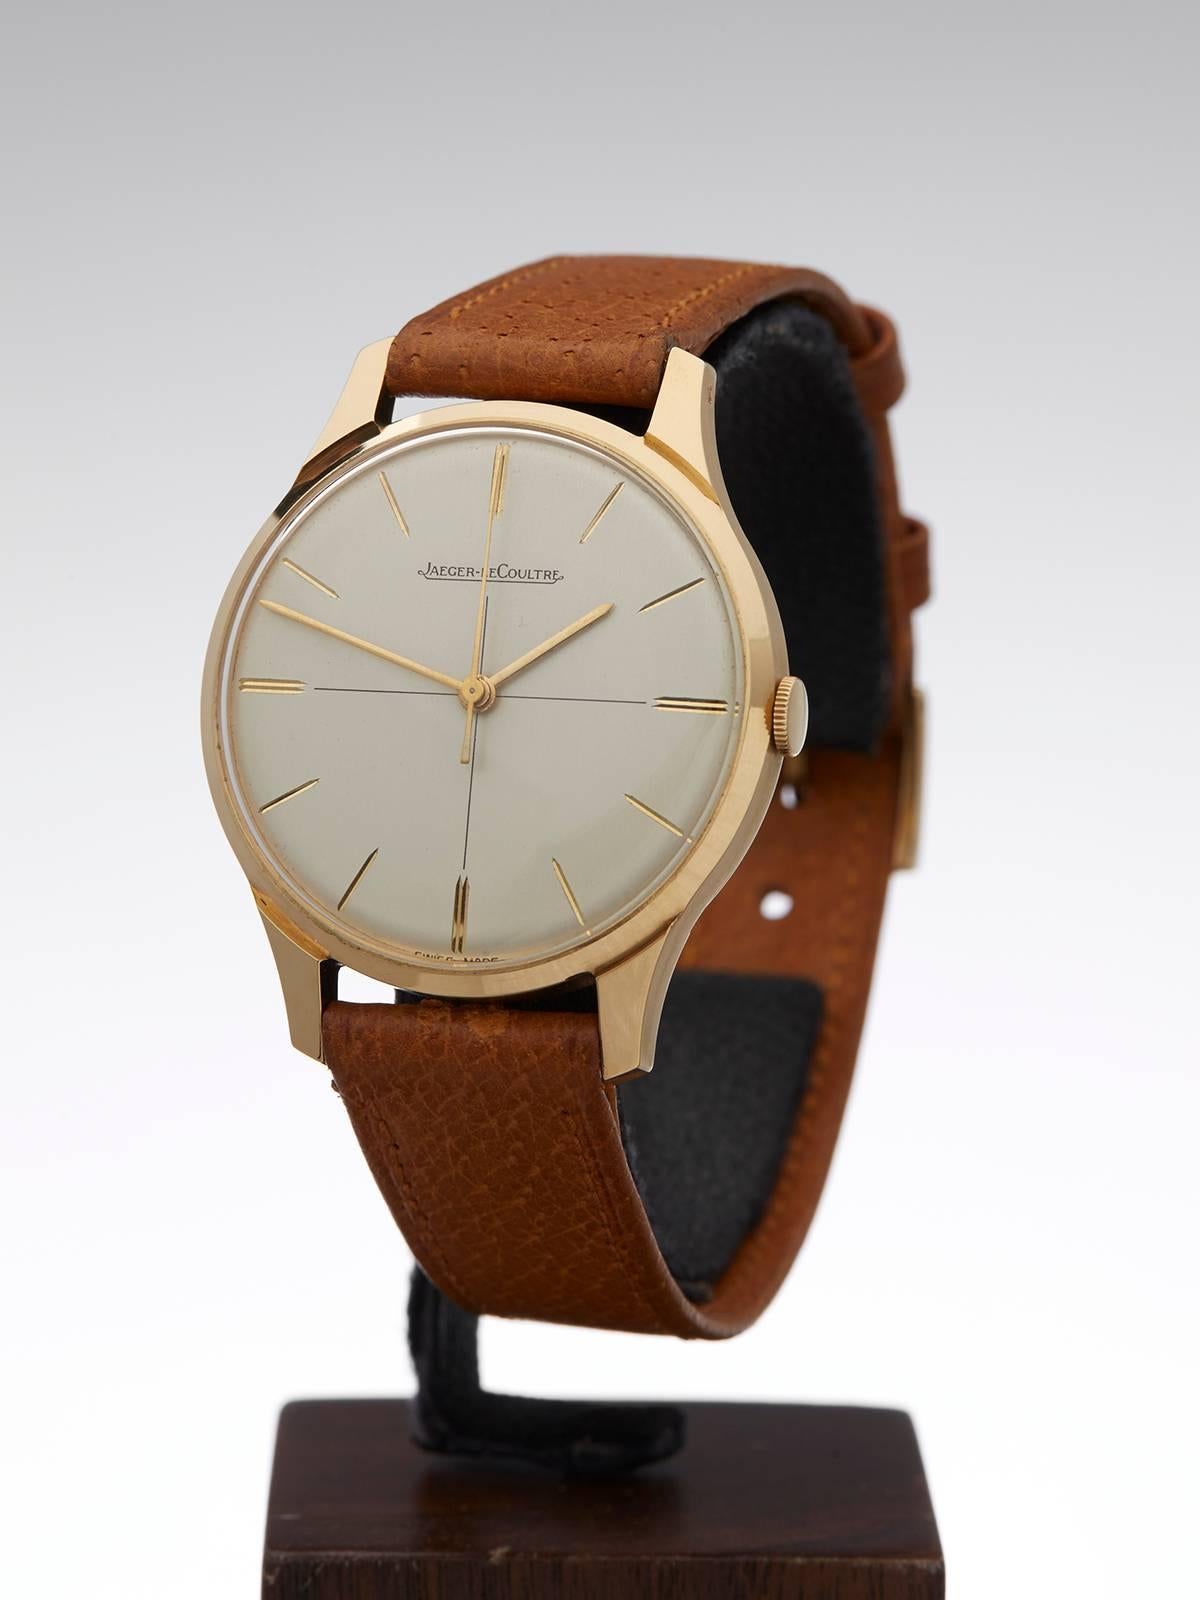 Ref: COM777
Model: 163045
Condition: 9 - Excellent condition
Age: 1960's
Case Size: 33mm
Box and Papers: Box Only
Movement: Mechanical Wind
Case: 18k Yellow Gold
Dial: Silver Baton
Bracelet: Brown Leather
Strap Length: Adjustable up to 20cm
Strap